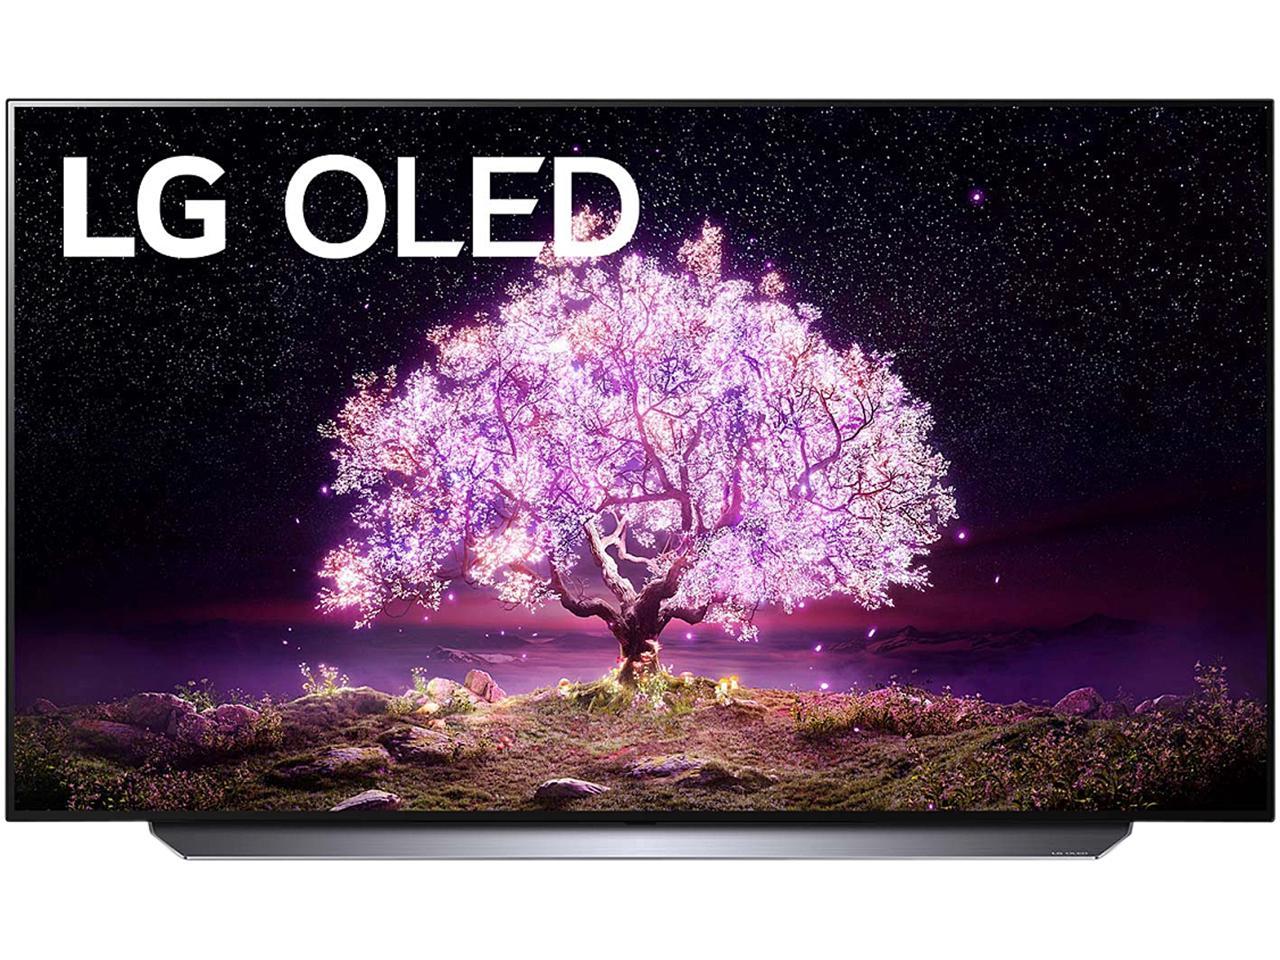 LG OLED48C1PUB 4K Smart OLED TV w/ AI ThinQ (2021) + $50GC + 4yr Burn-in Wty + NVidia Streaming Credit $1097